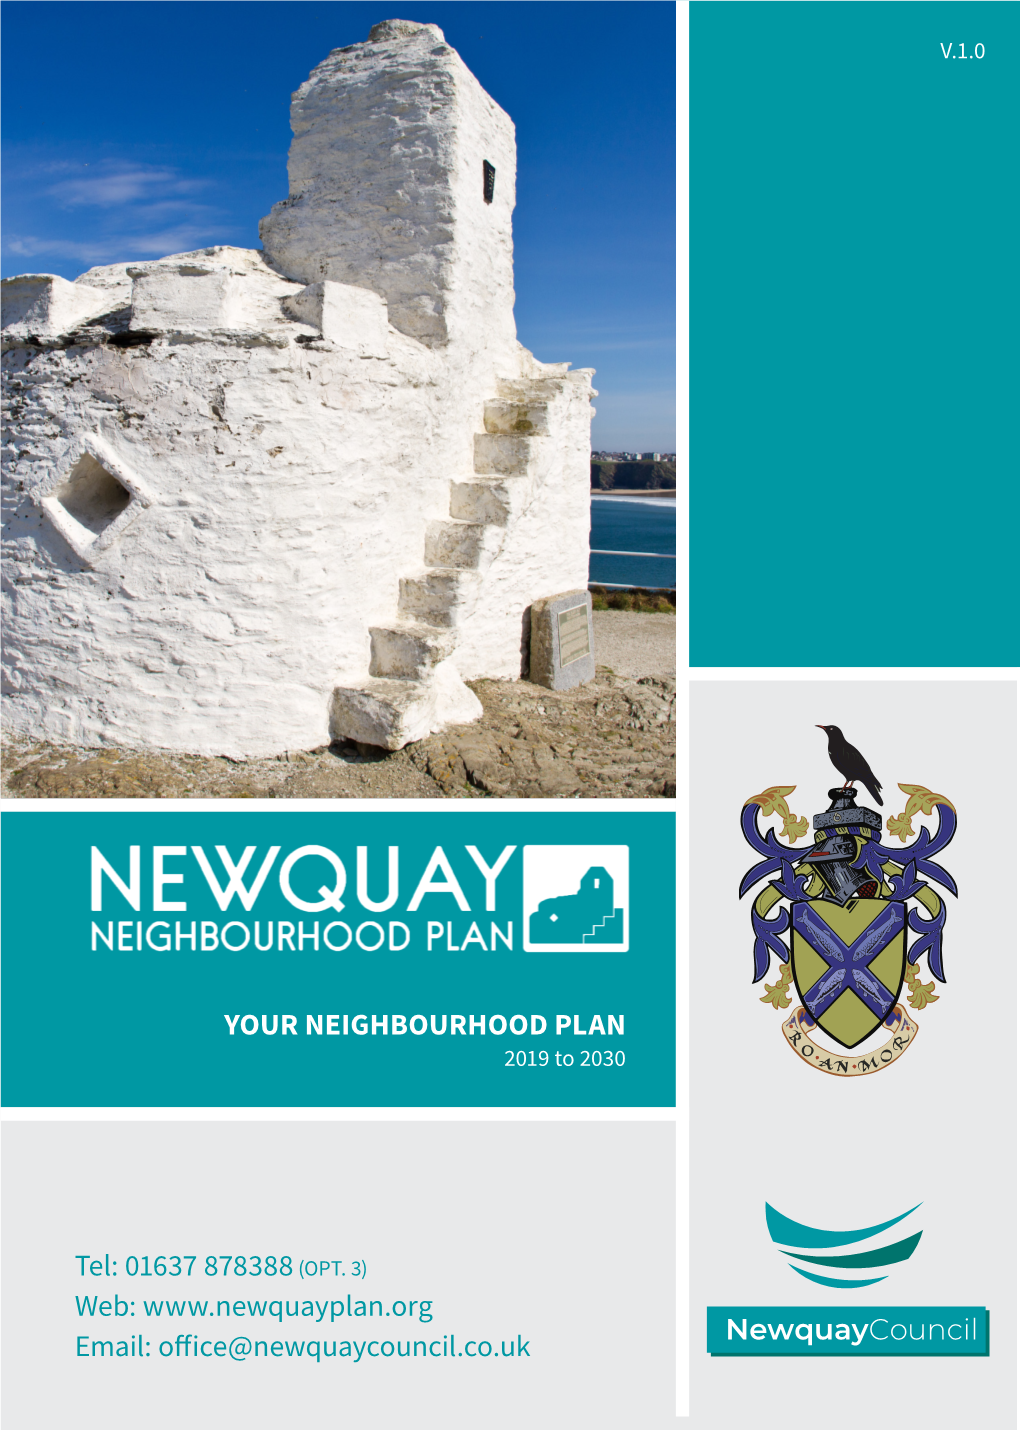 Office@Newquaycouncil.Co.Uk Tel: 01637 878388(OPT. 3)